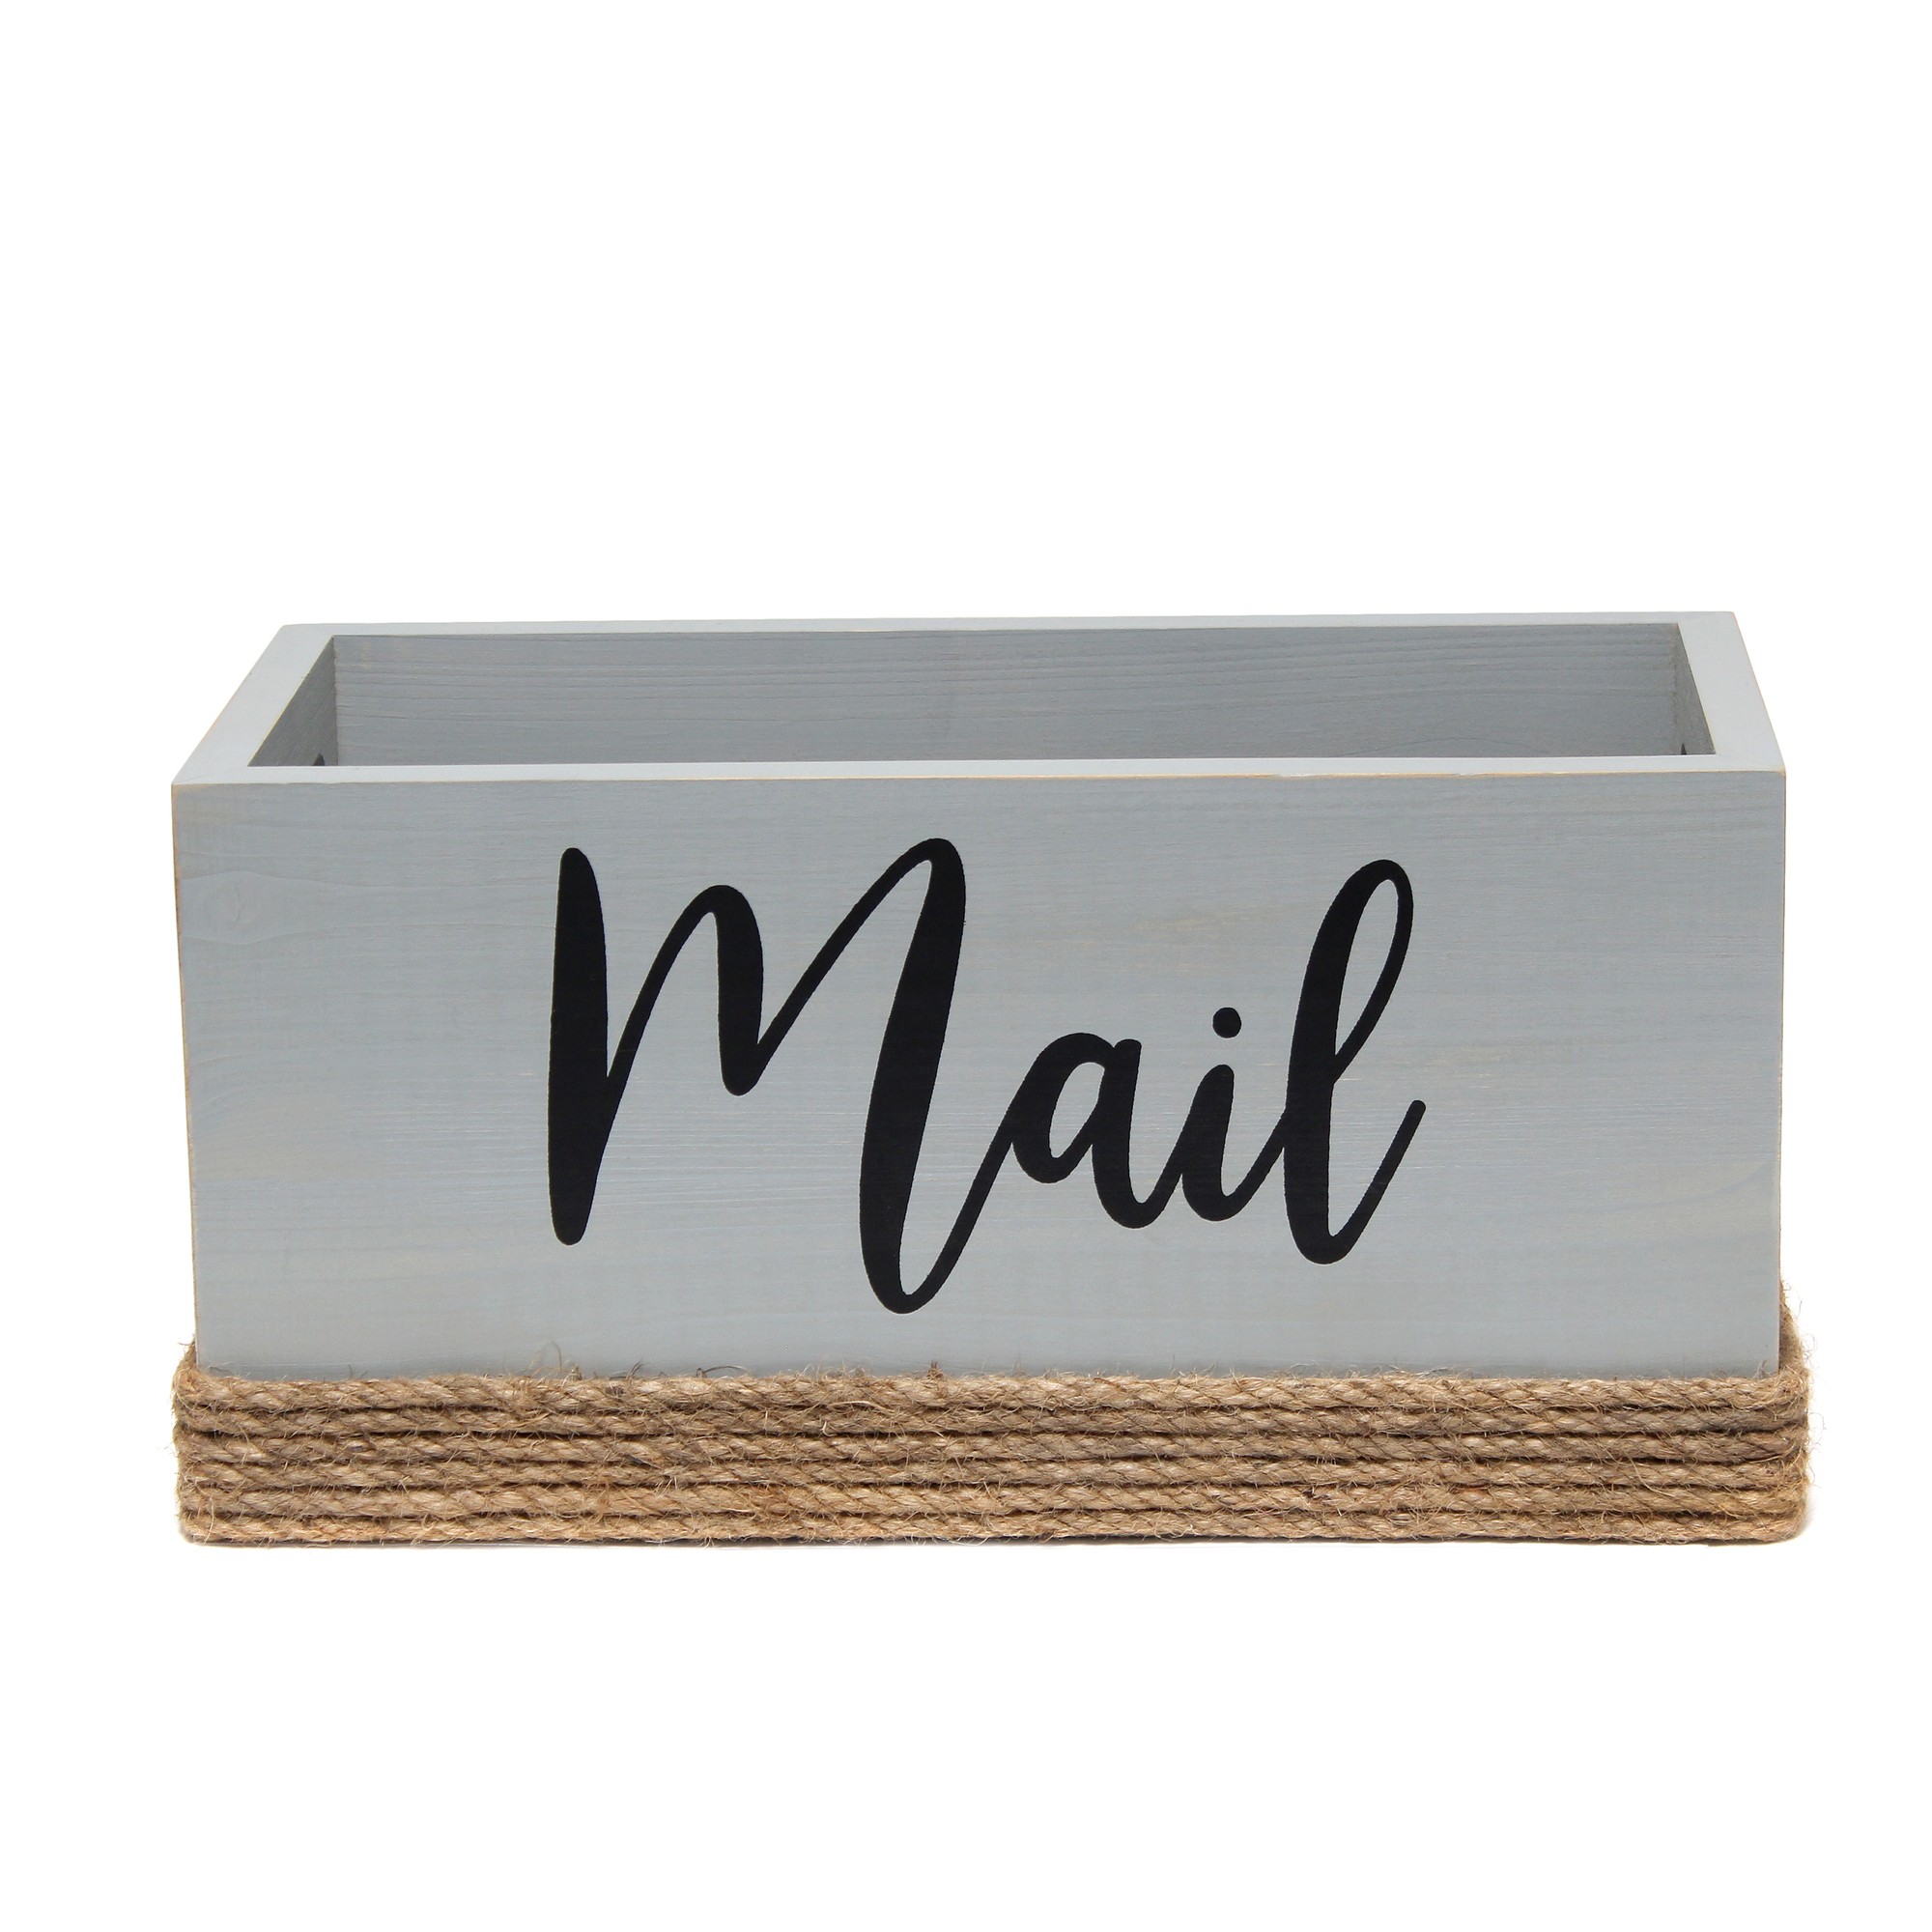 Wood Mail Holder "Mail" Script in Black, Gray